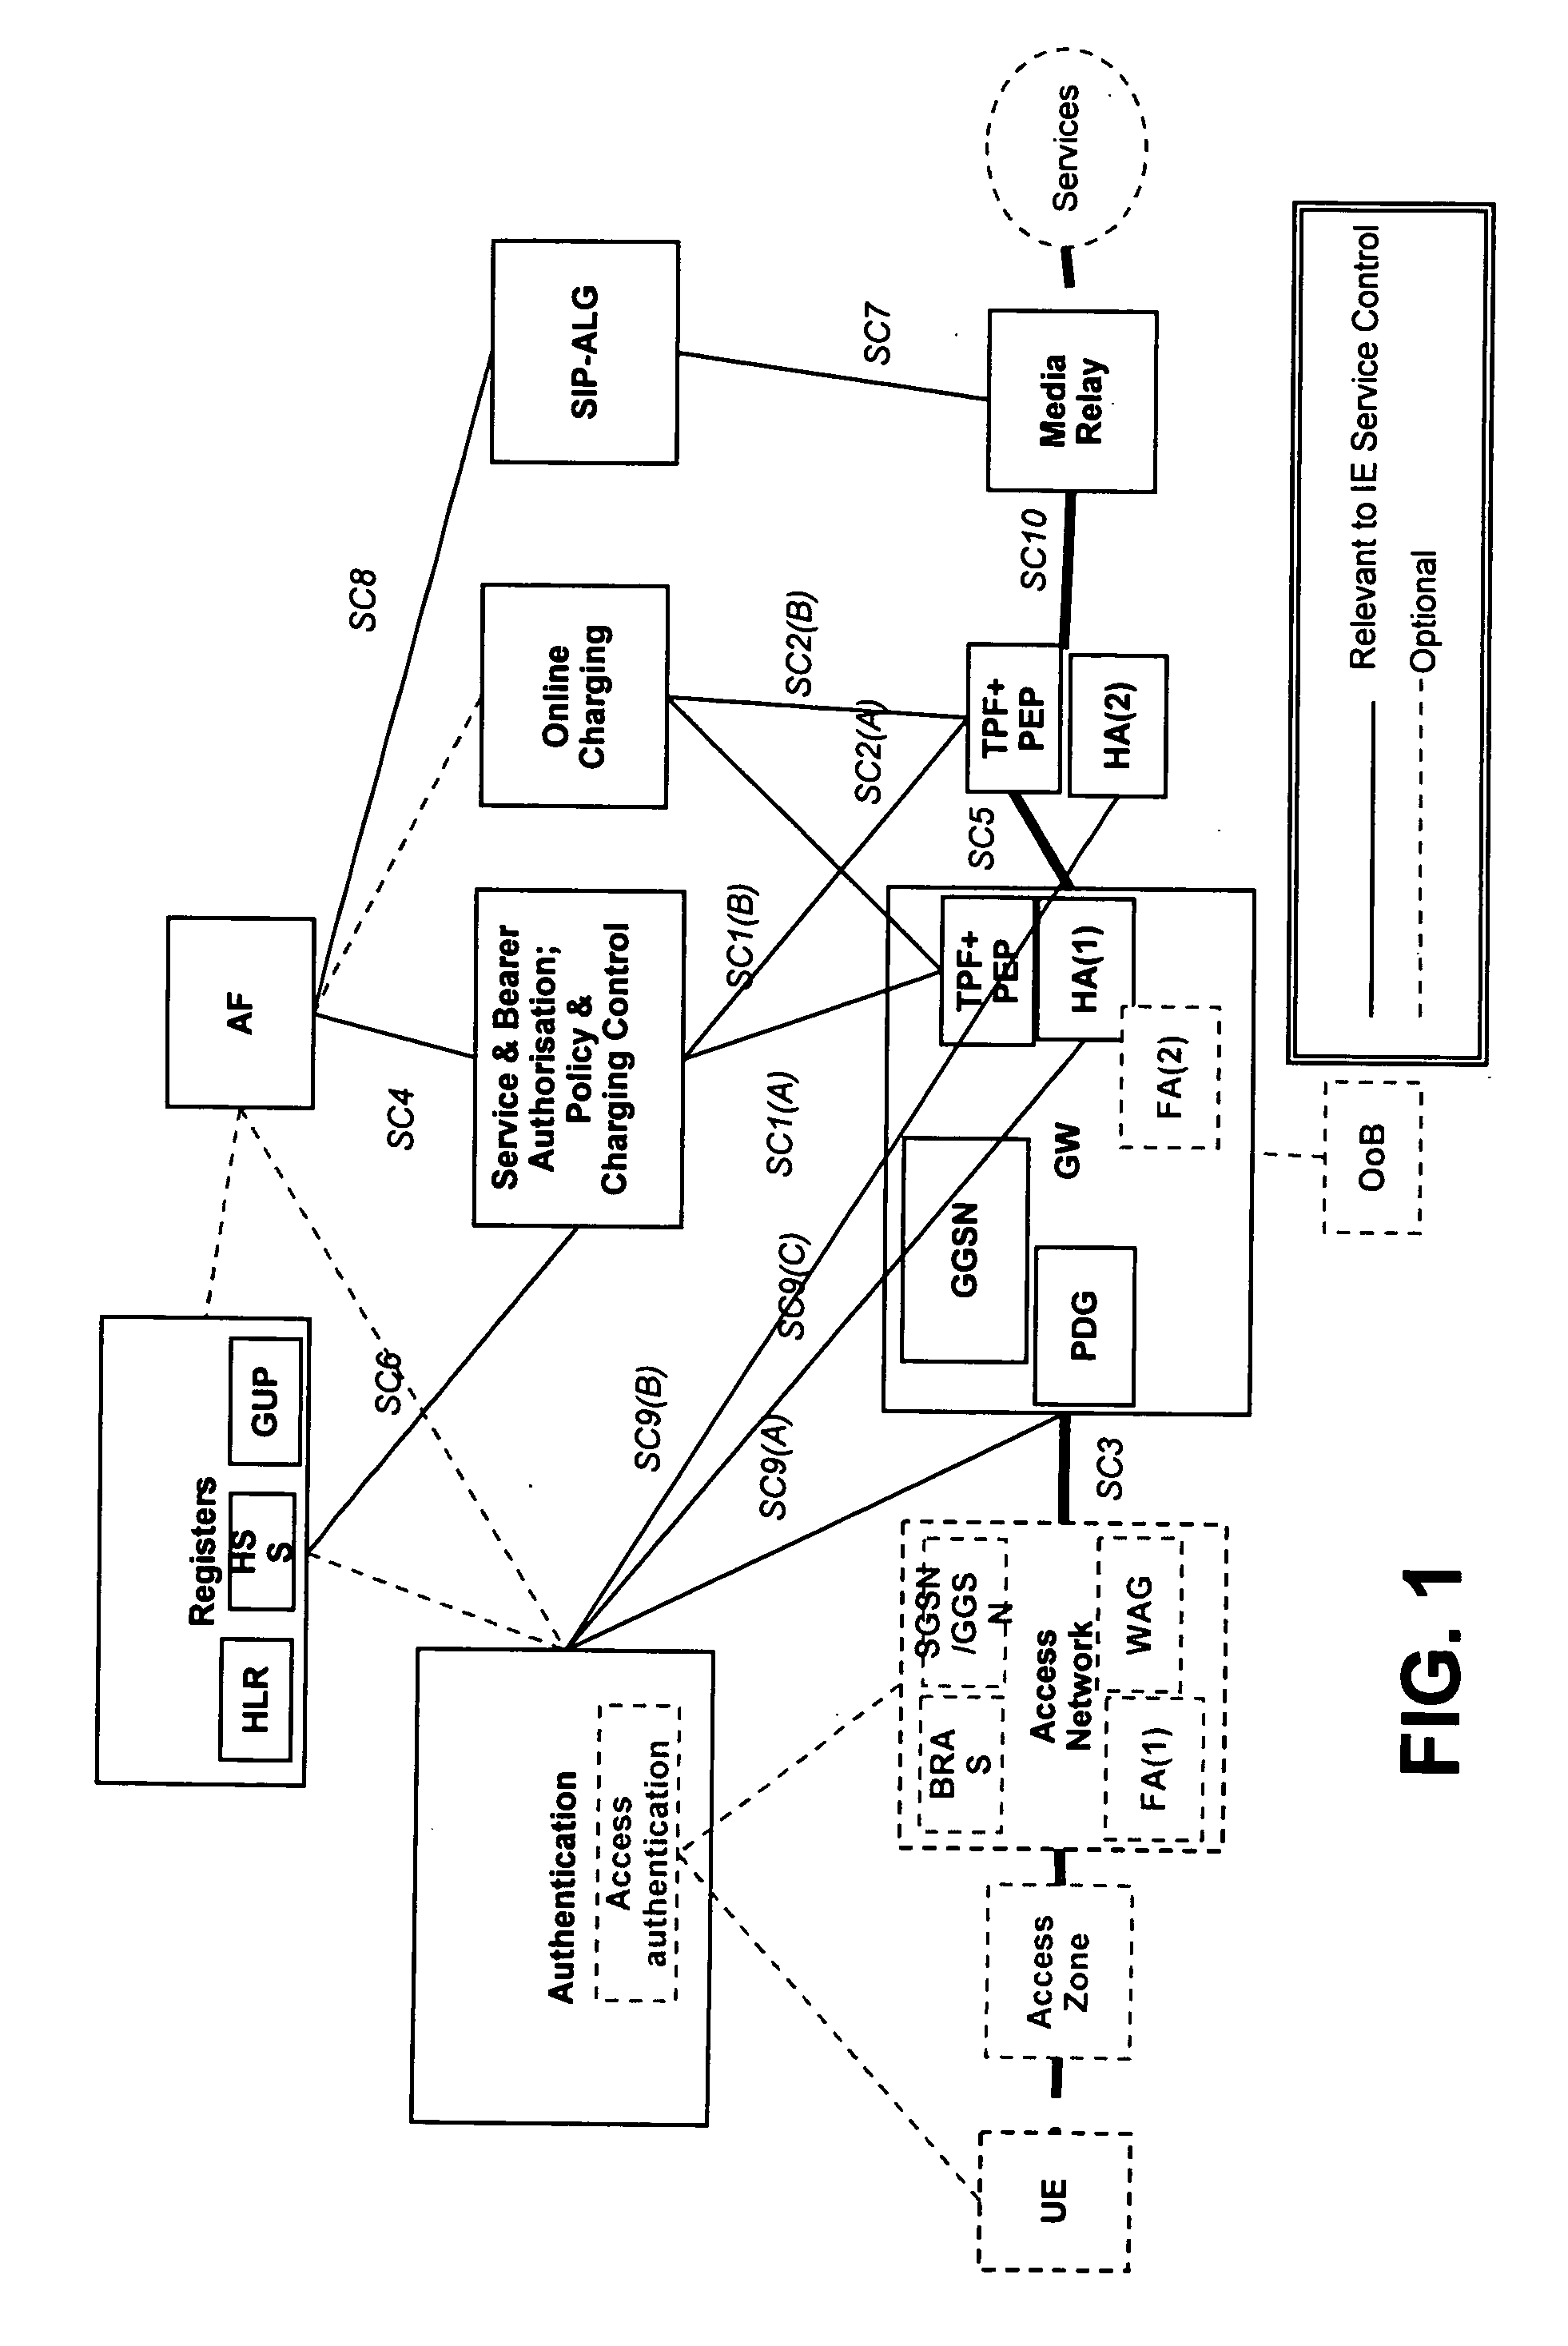 Inter-access mobility and service control